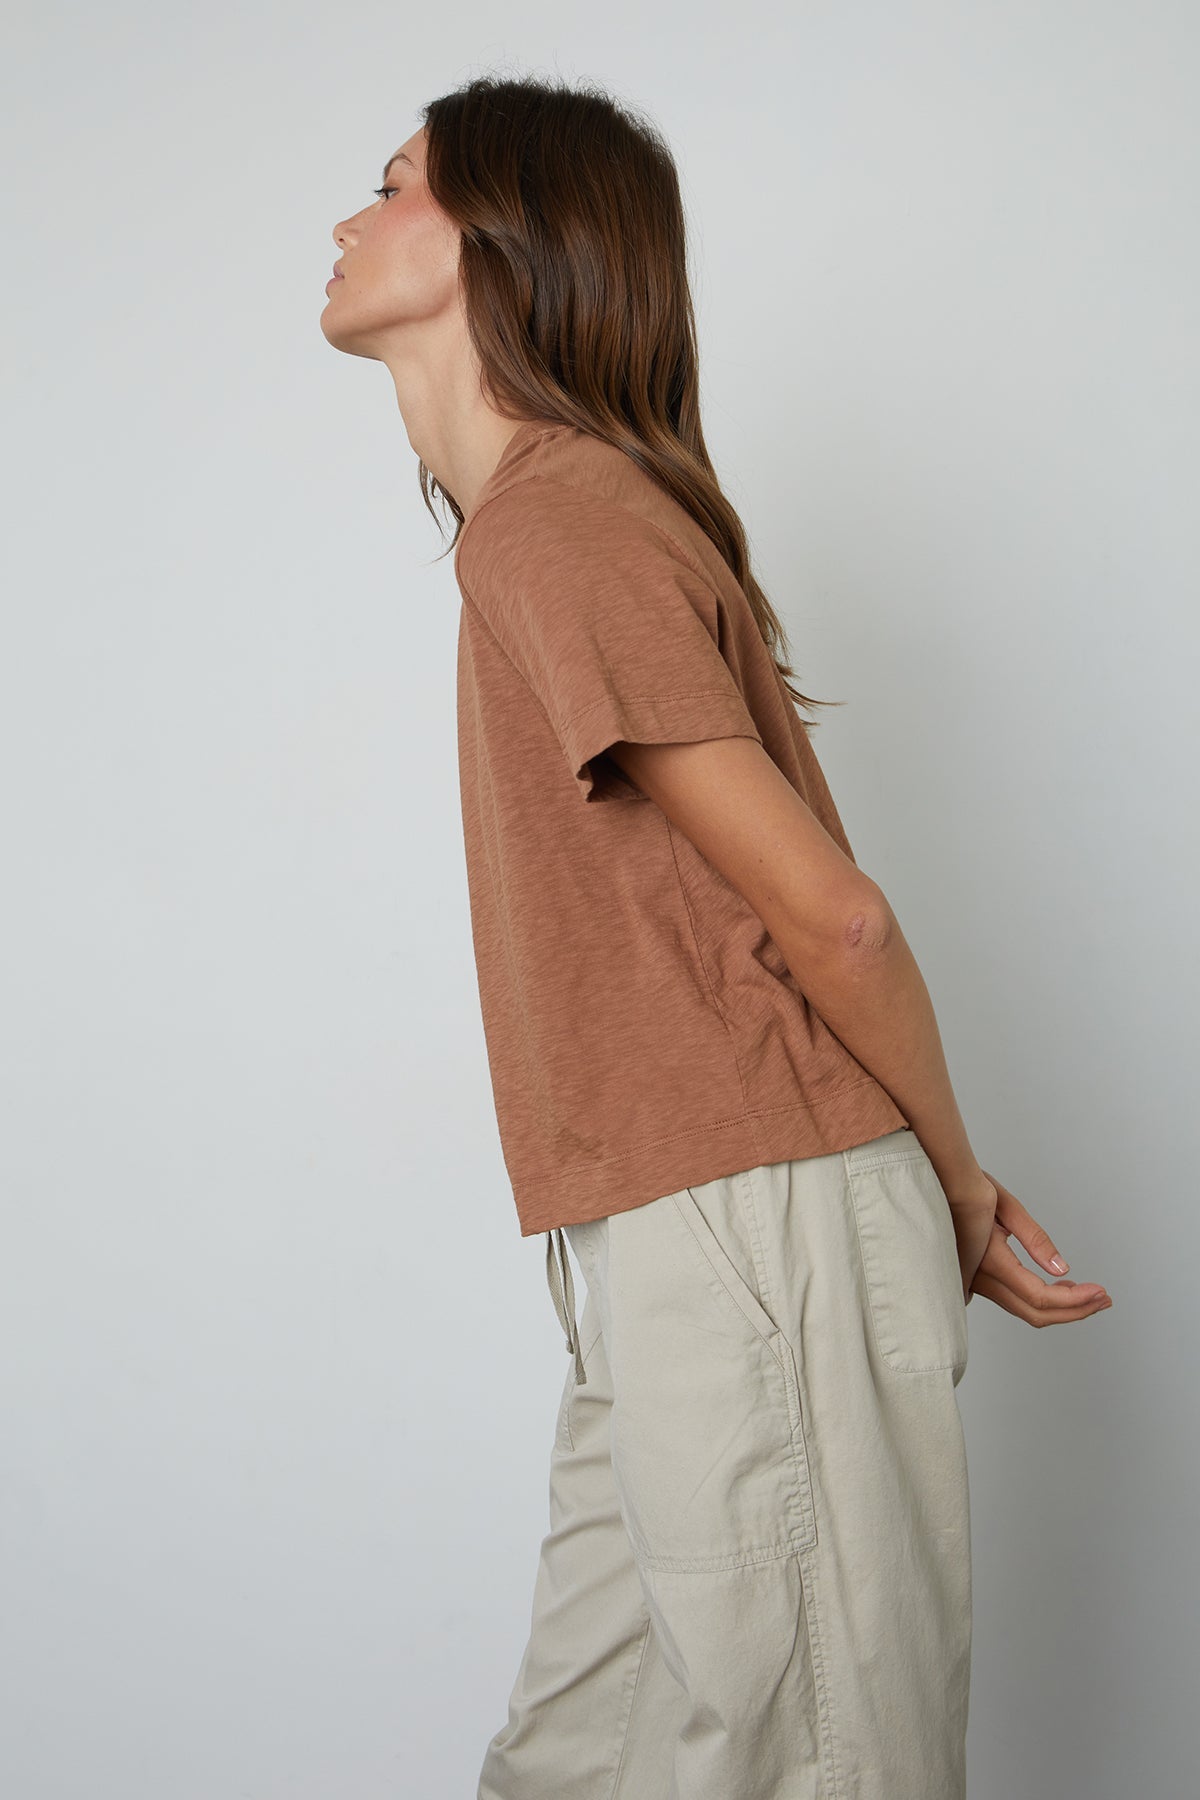   A vintage woman wearing a LULA COTTON SLUB SWING TEE by Velvet by Graham & Spencer and khaki pants. 